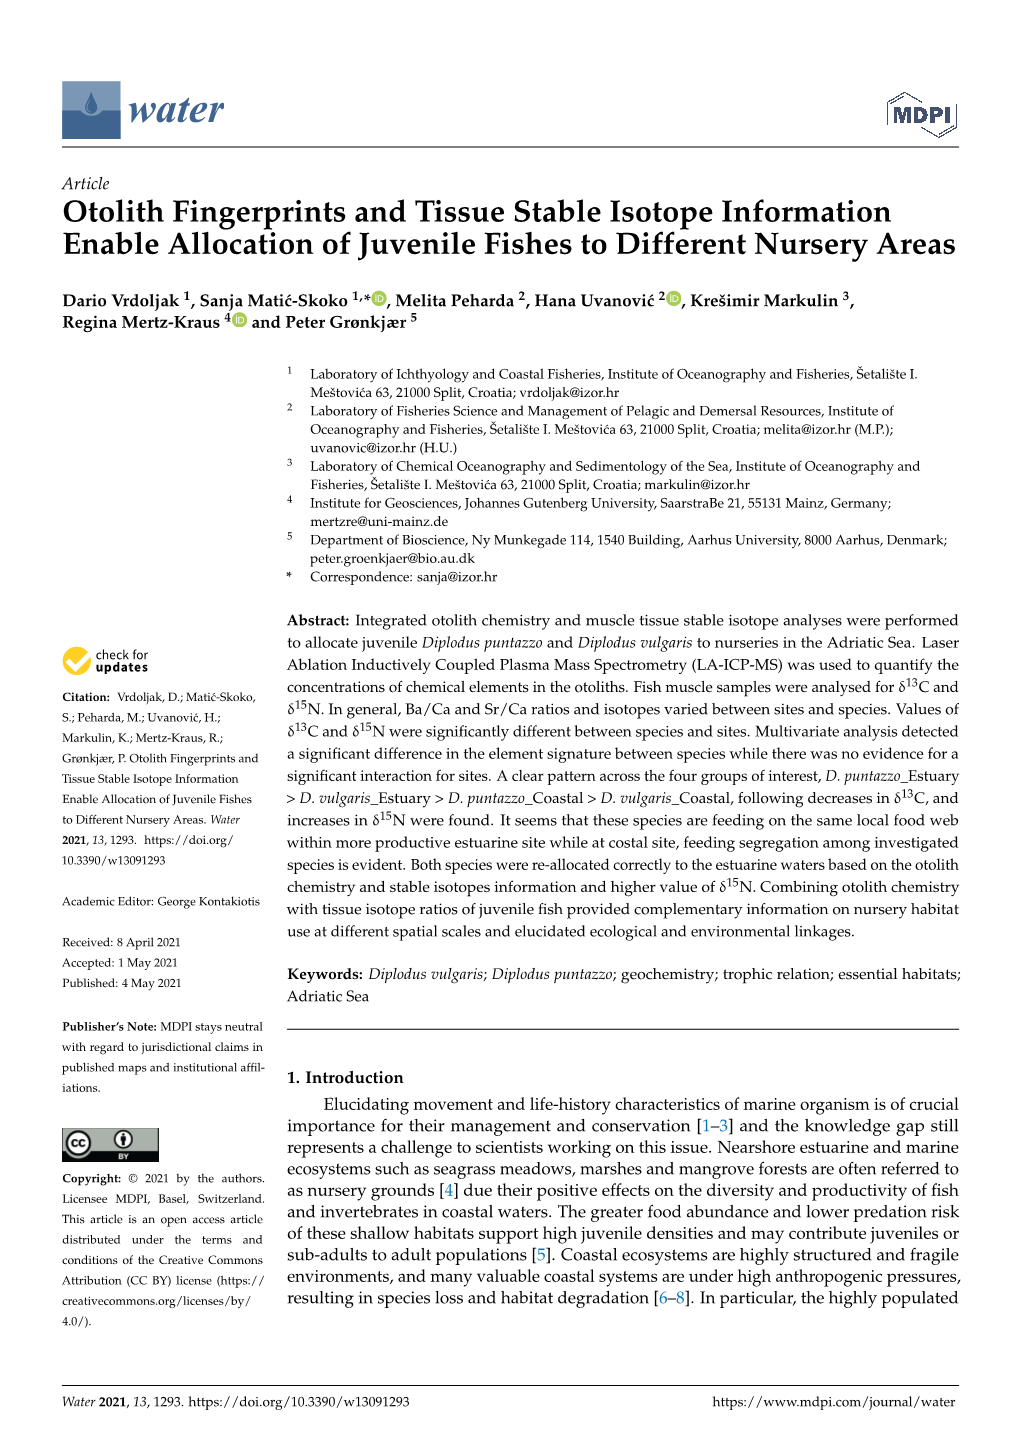 Otolith Fingerprints and Tissue Stable Isotope Information Enable Allocation of Juvenile Fishes to Different Nursery Areas